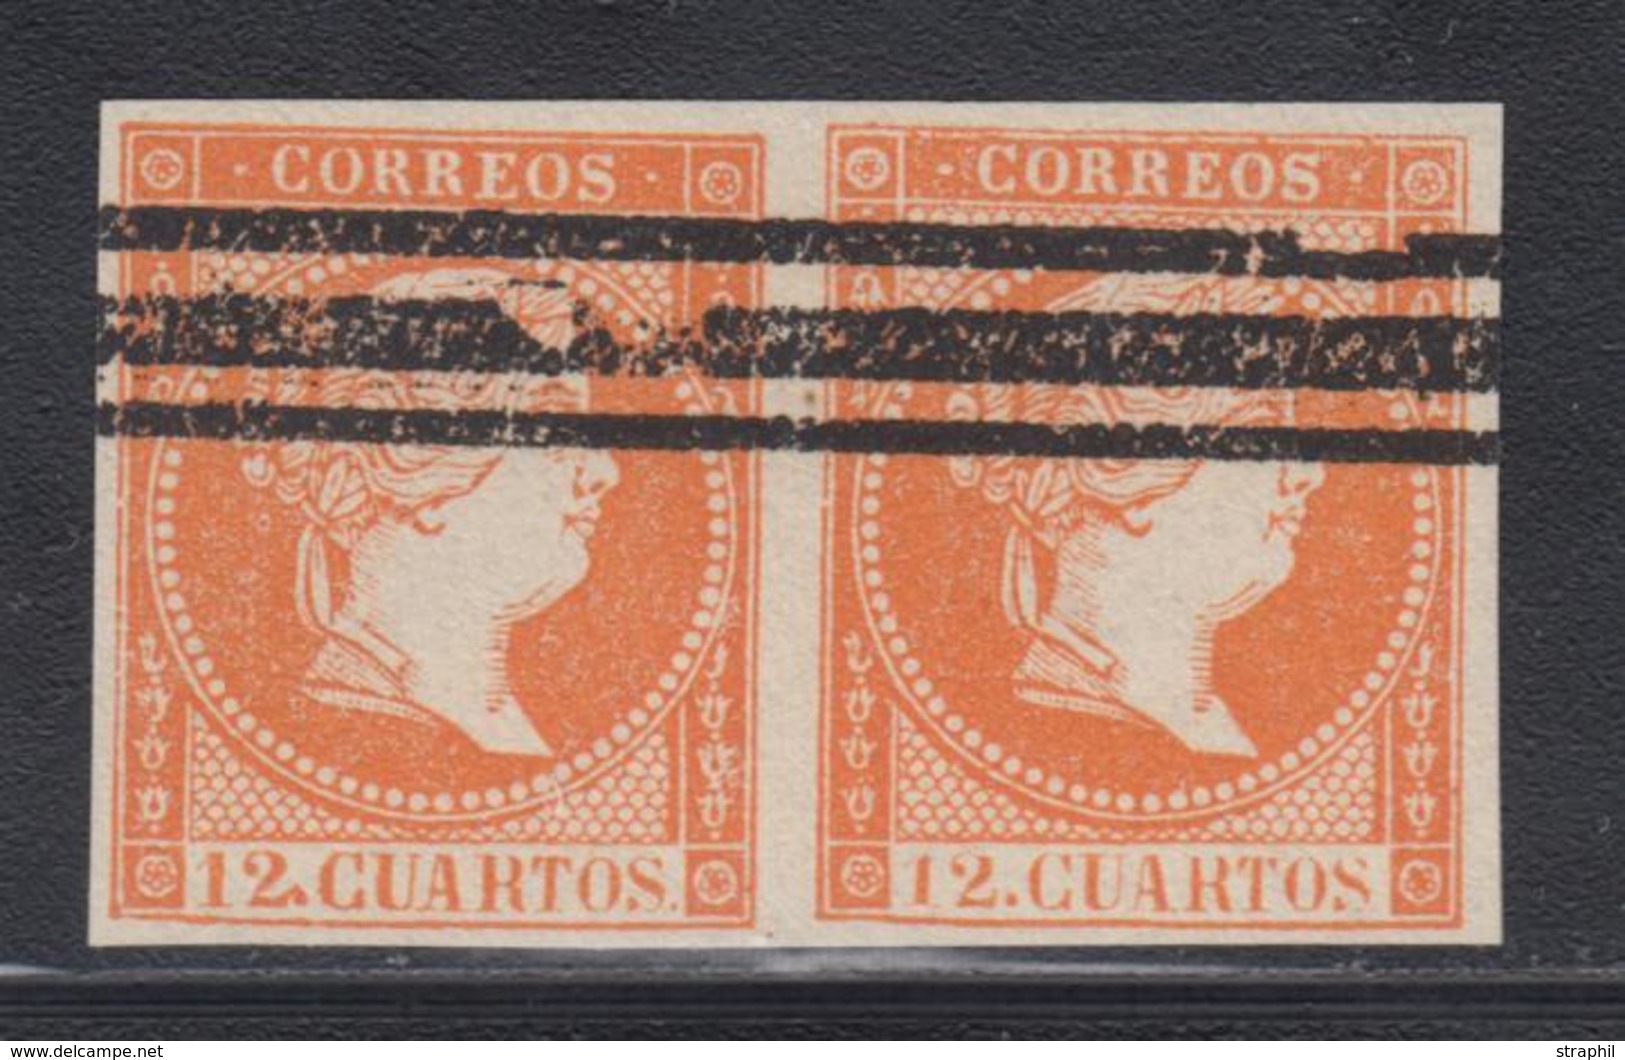 O ESPAGNE - O - N°44a - Paire - Annulé 3 Barres Horiz. - TB - Unused Stamps